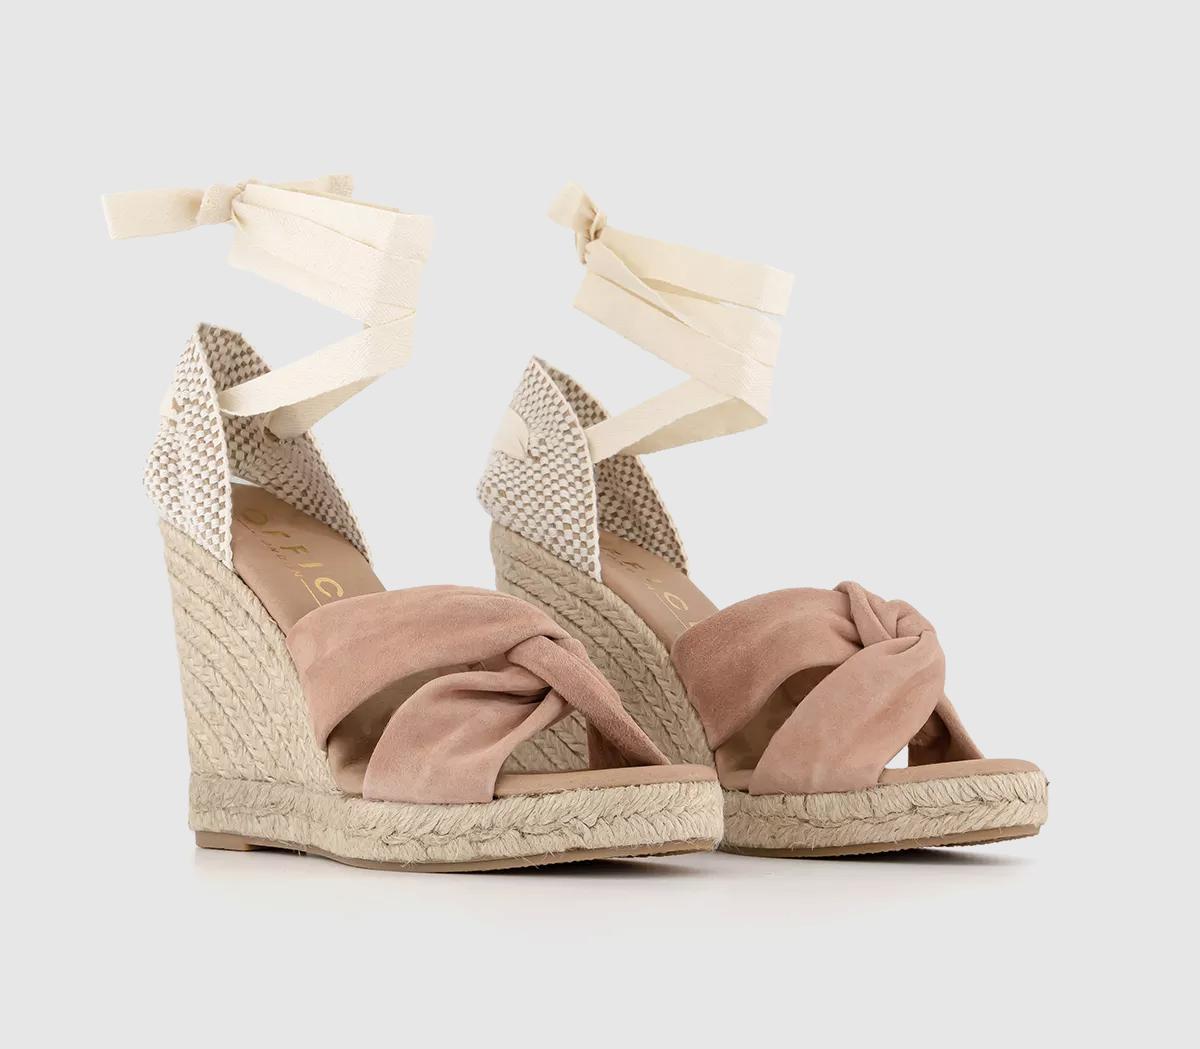 OFFICE Womens Heather Ankle Tie Espadrilles Blush Suede, 7